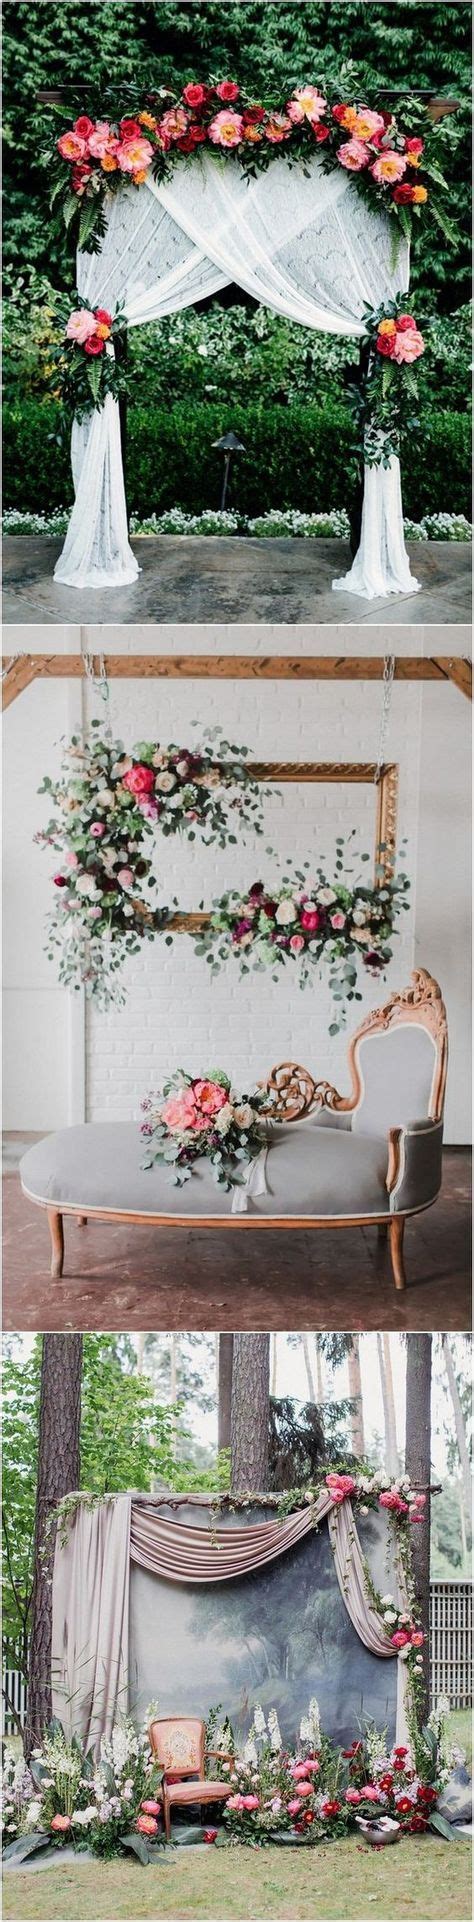 Trending 15 Hottest Wedding Backdrop Ideas For Your